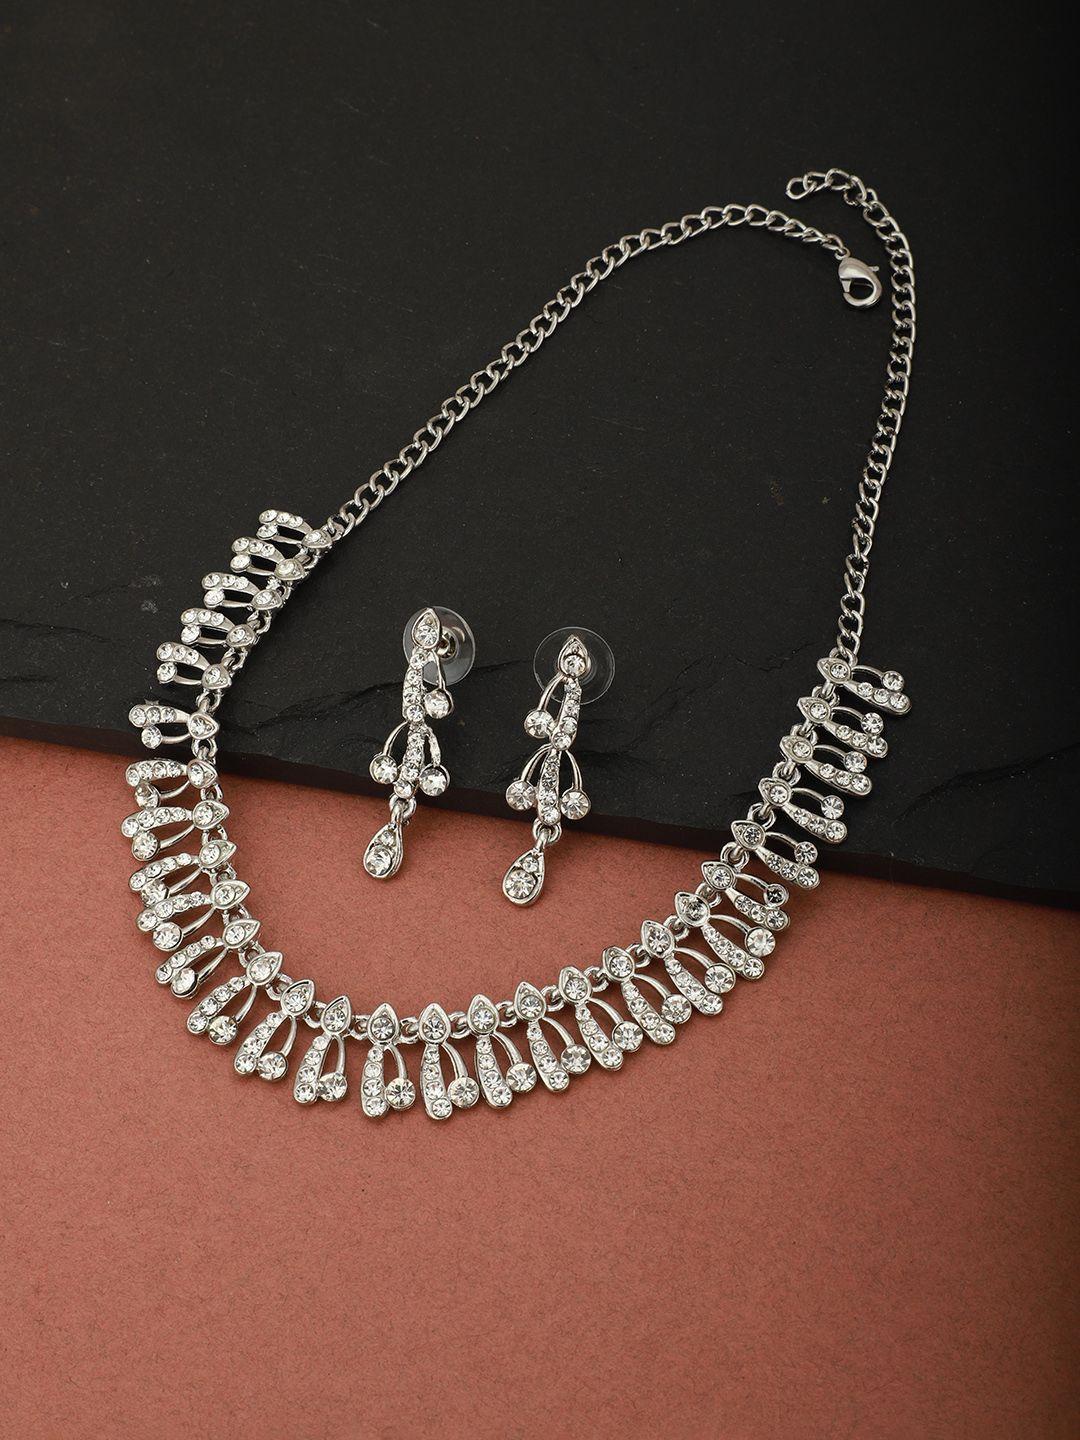 carlton london silver-plated rhodium-plated cz-studded handcrafted jewellery set